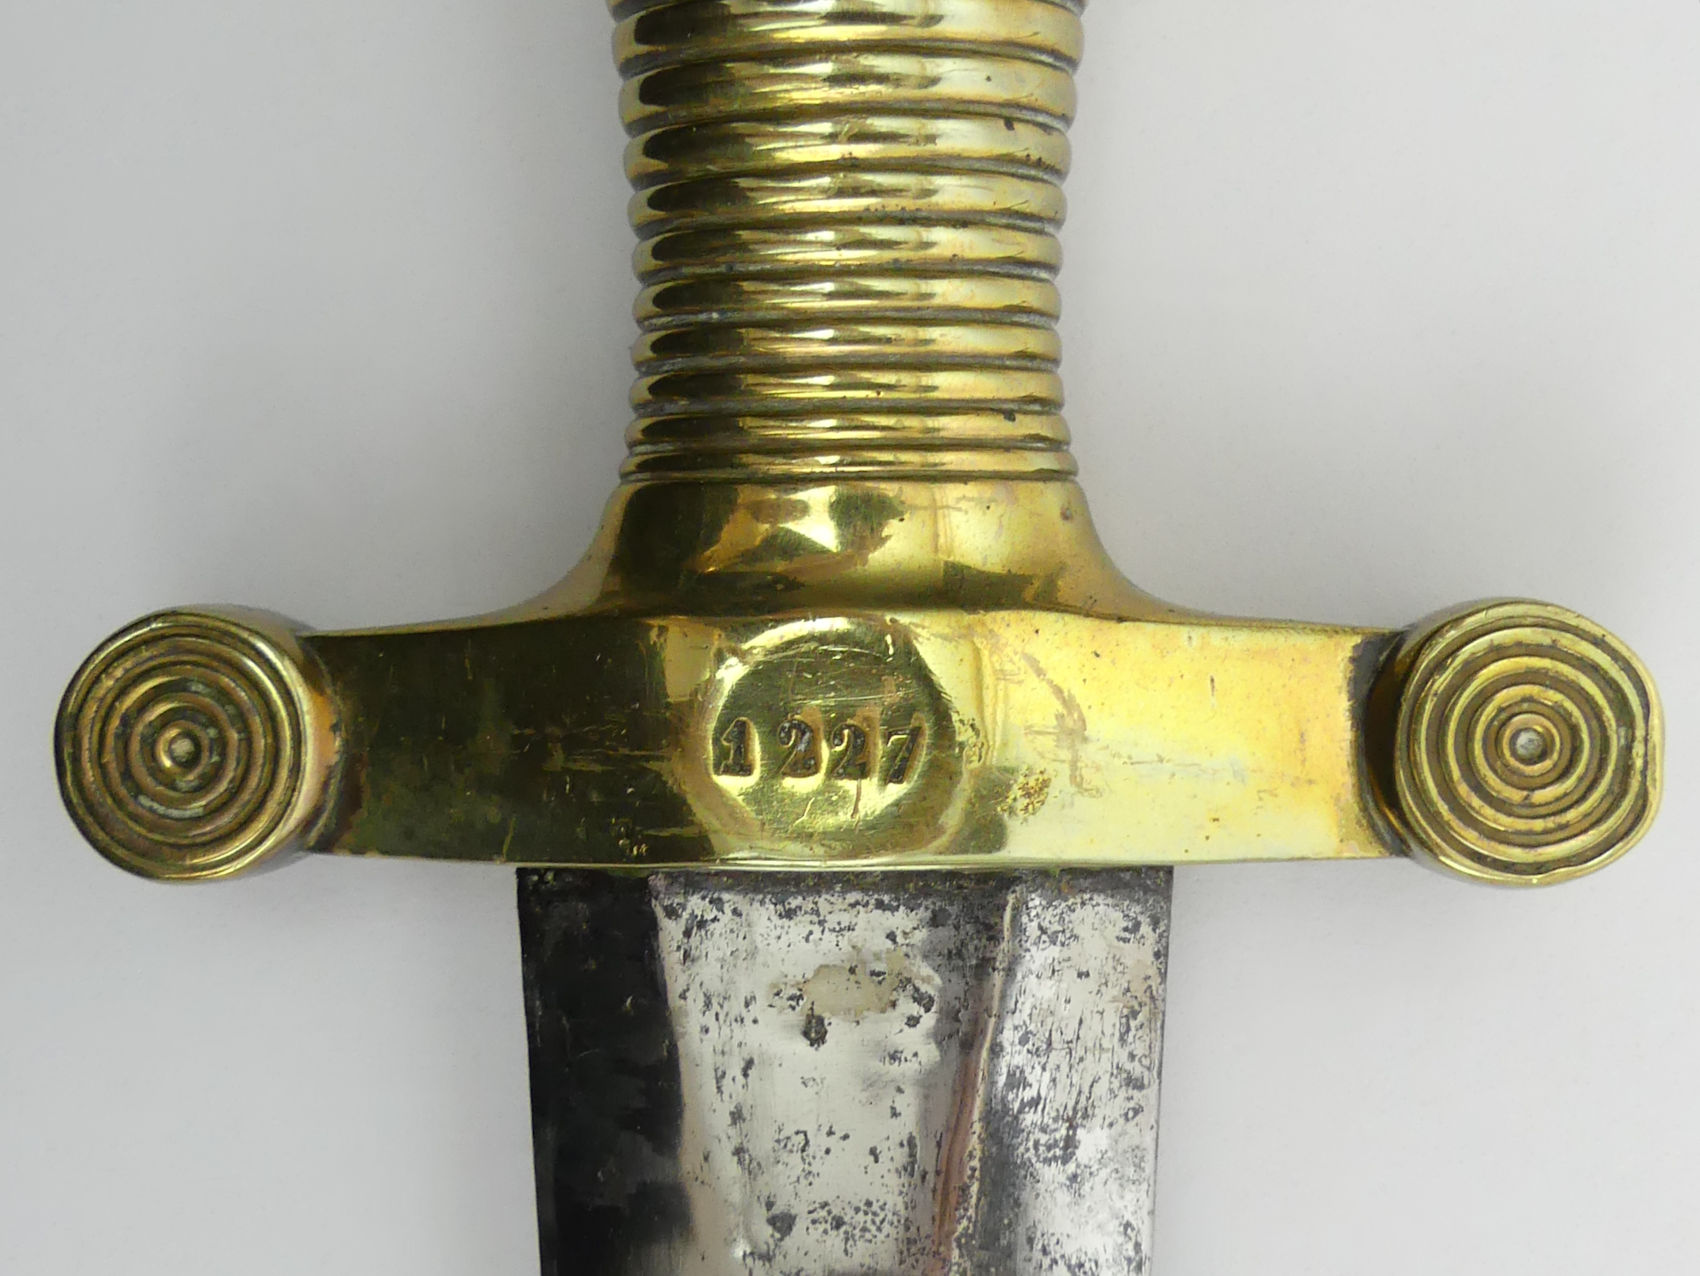 French 1831 pattern French artillery sidearm Gladius type sword and scabbard, 63.5cm length of - Image 12 of 12